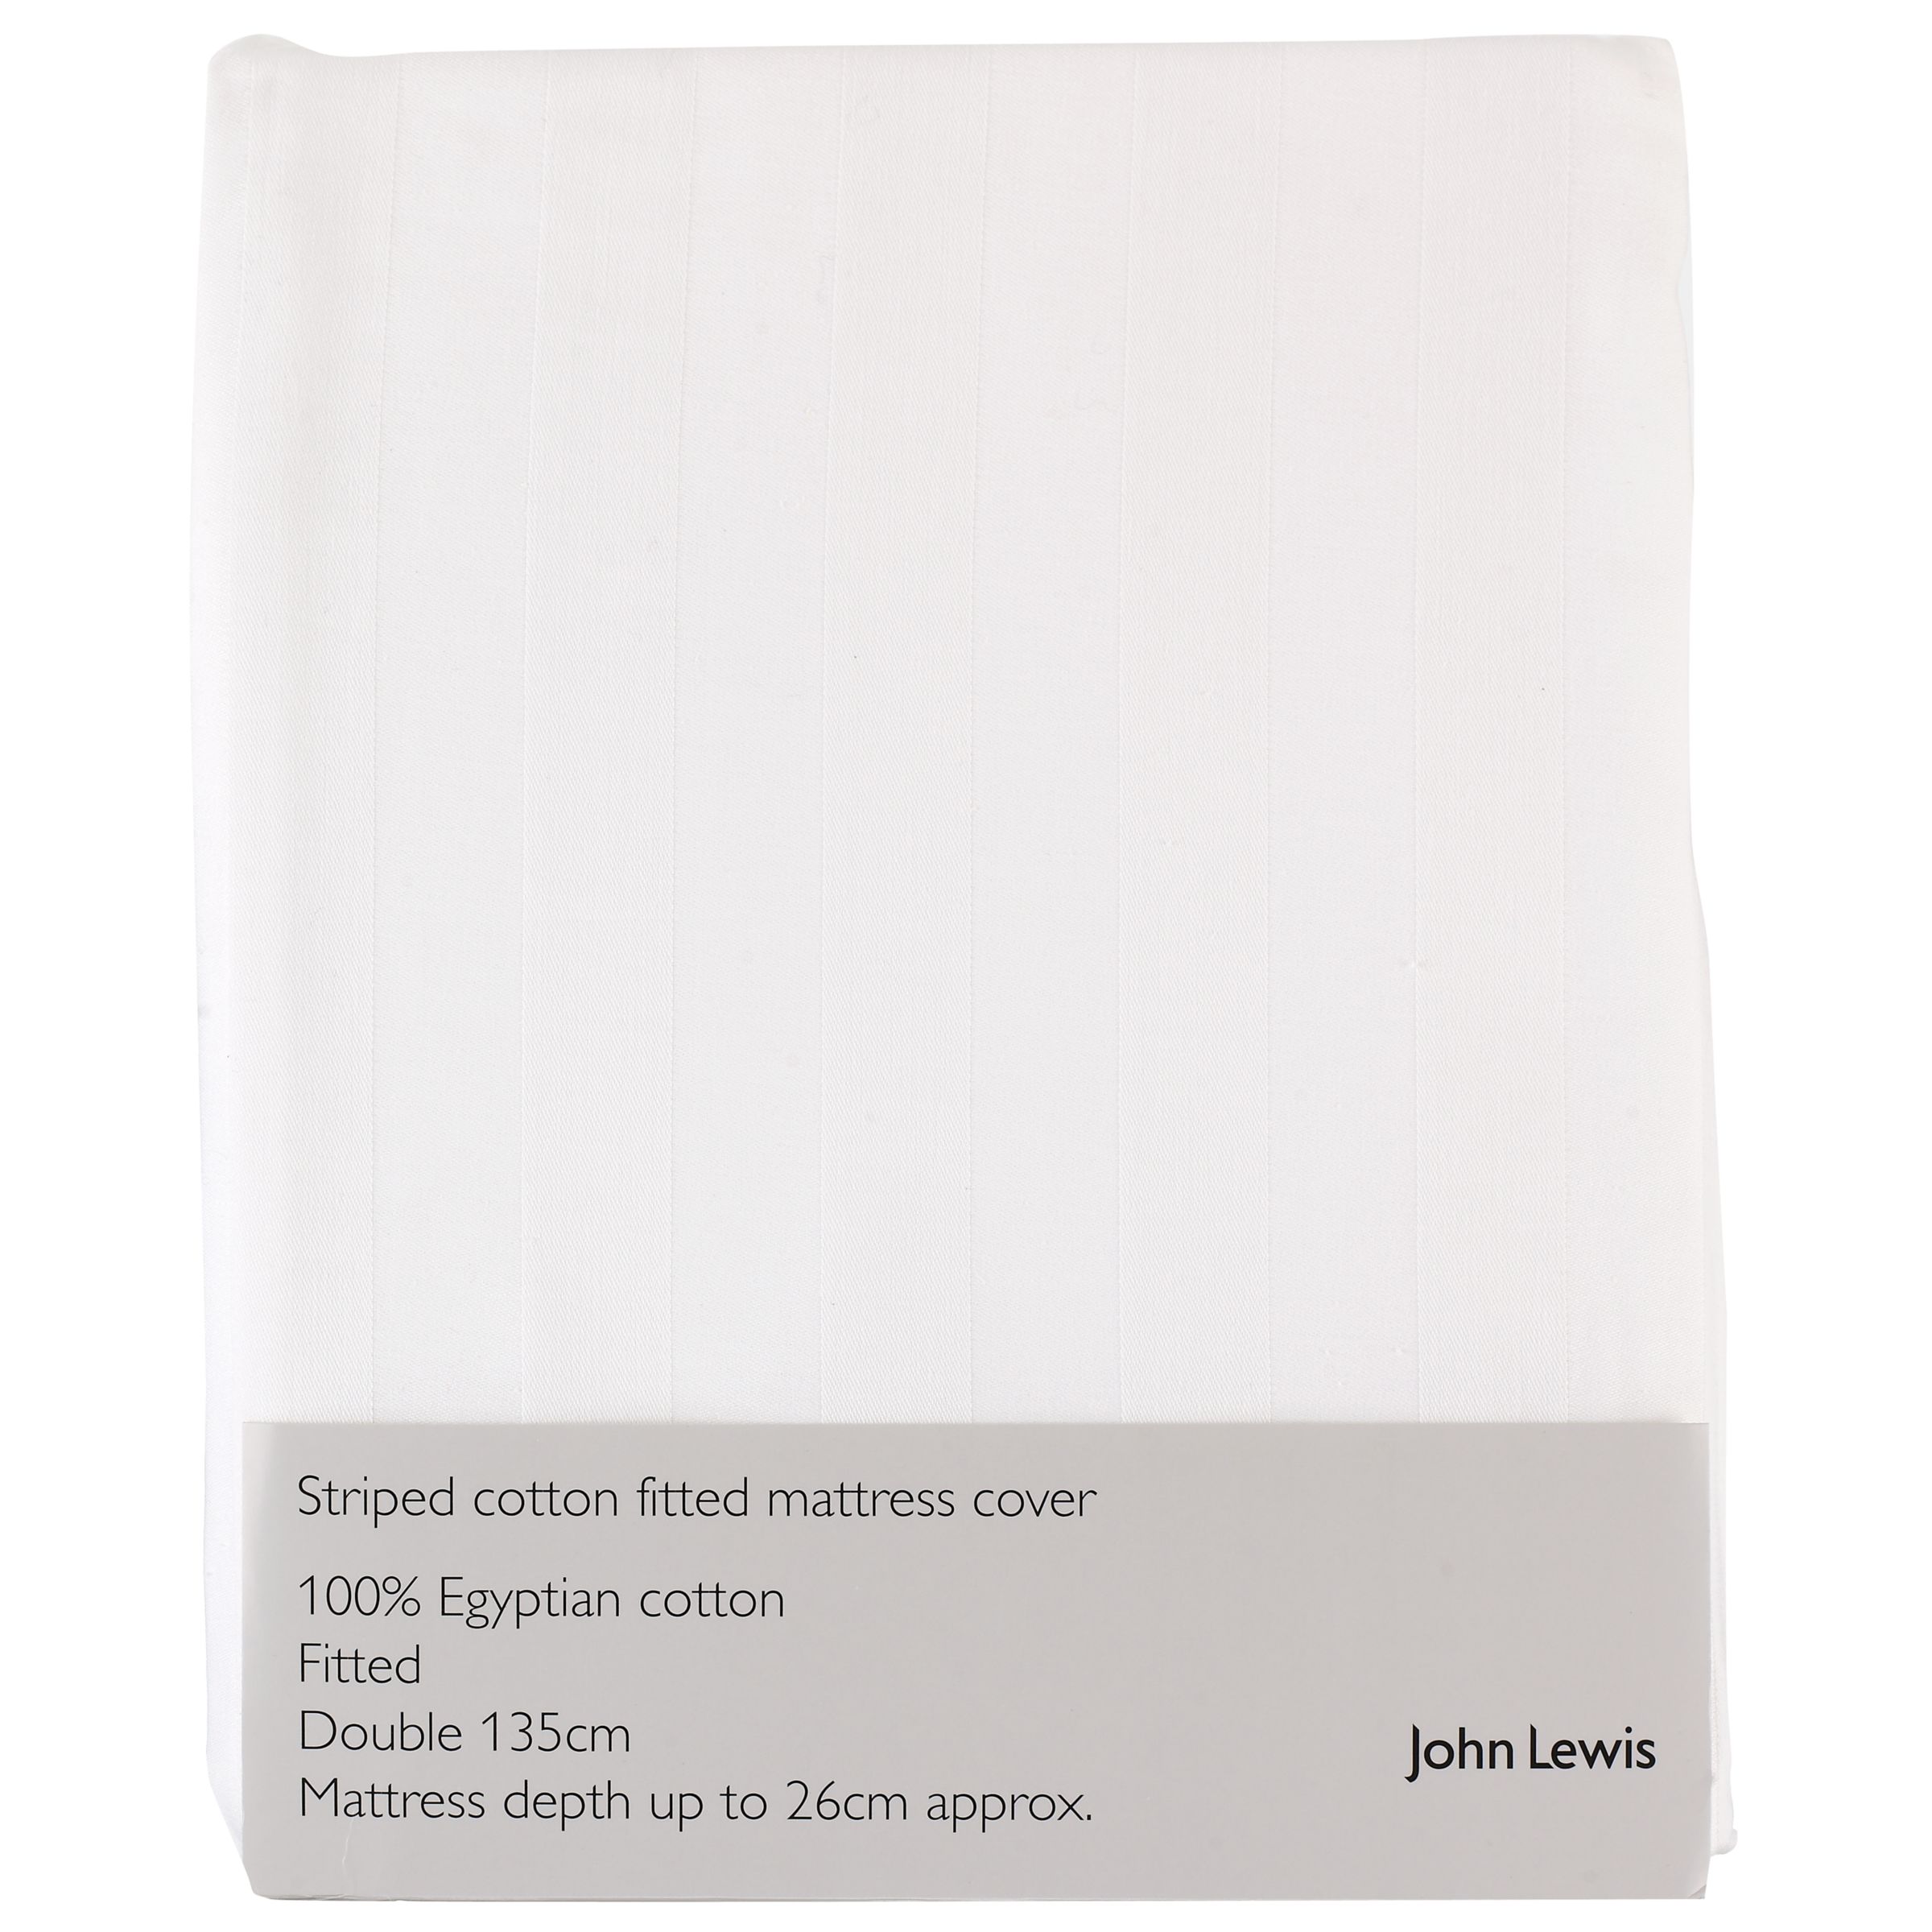 John Lewis Self Stripe Fitted Mattress Protector, Double